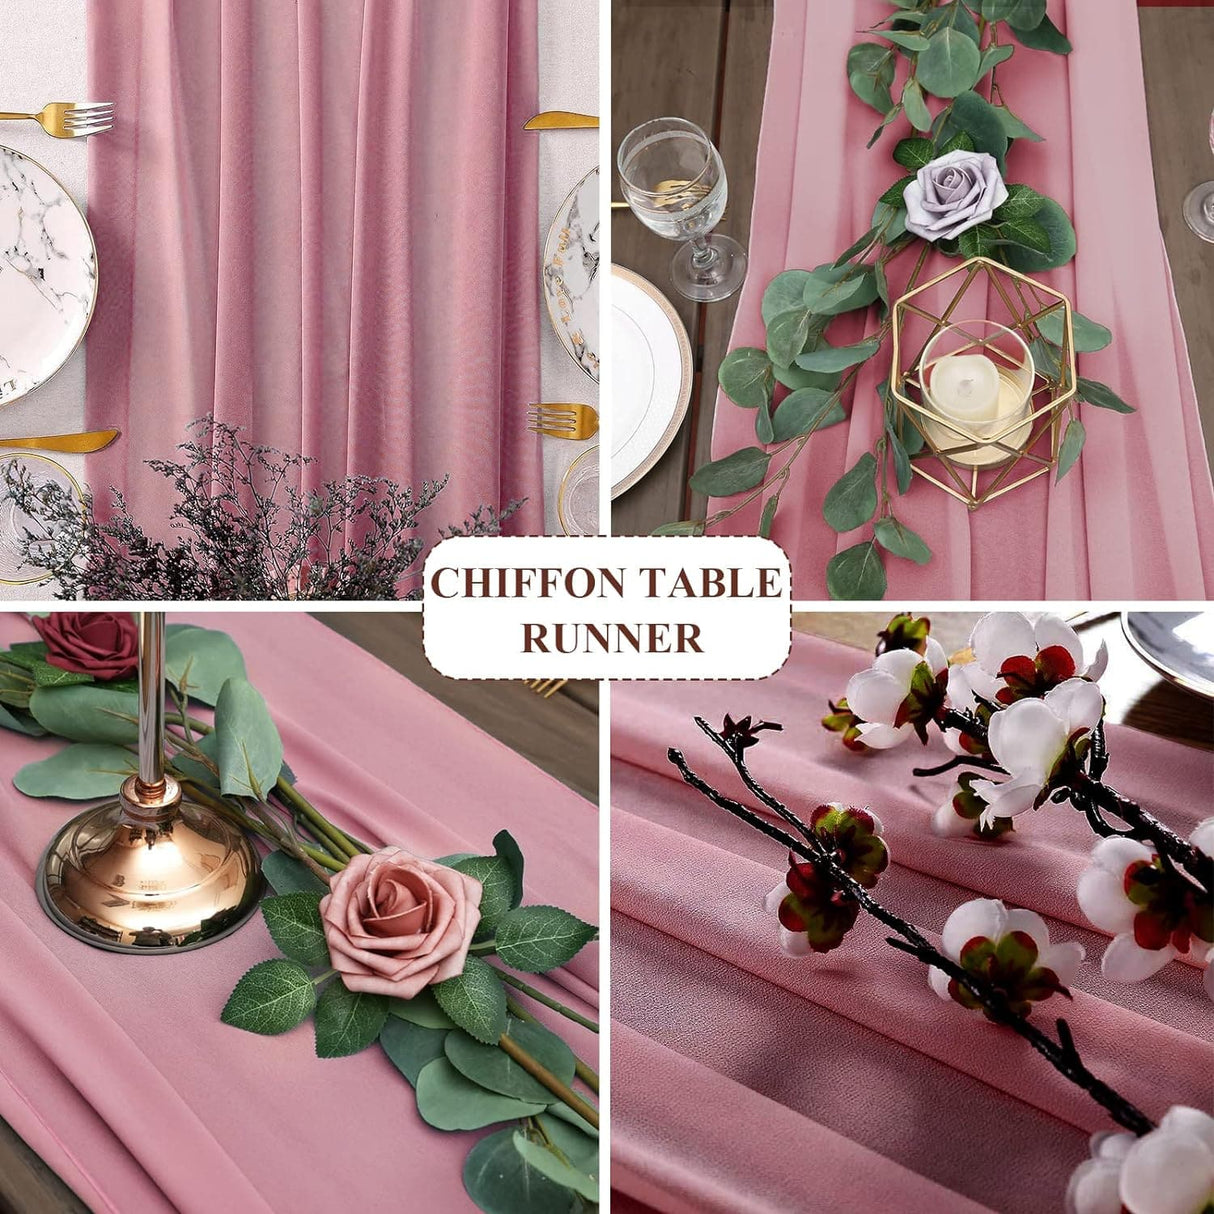 10/20  Pcs Chiffon Table Runner 10Ft -28x120 Inches Sheer Chiffon Table Runner Chiffon Romantic Wedding Runner Overlays for Wedding Decor Birthday Party Bridal Baby Shower Table Decoration